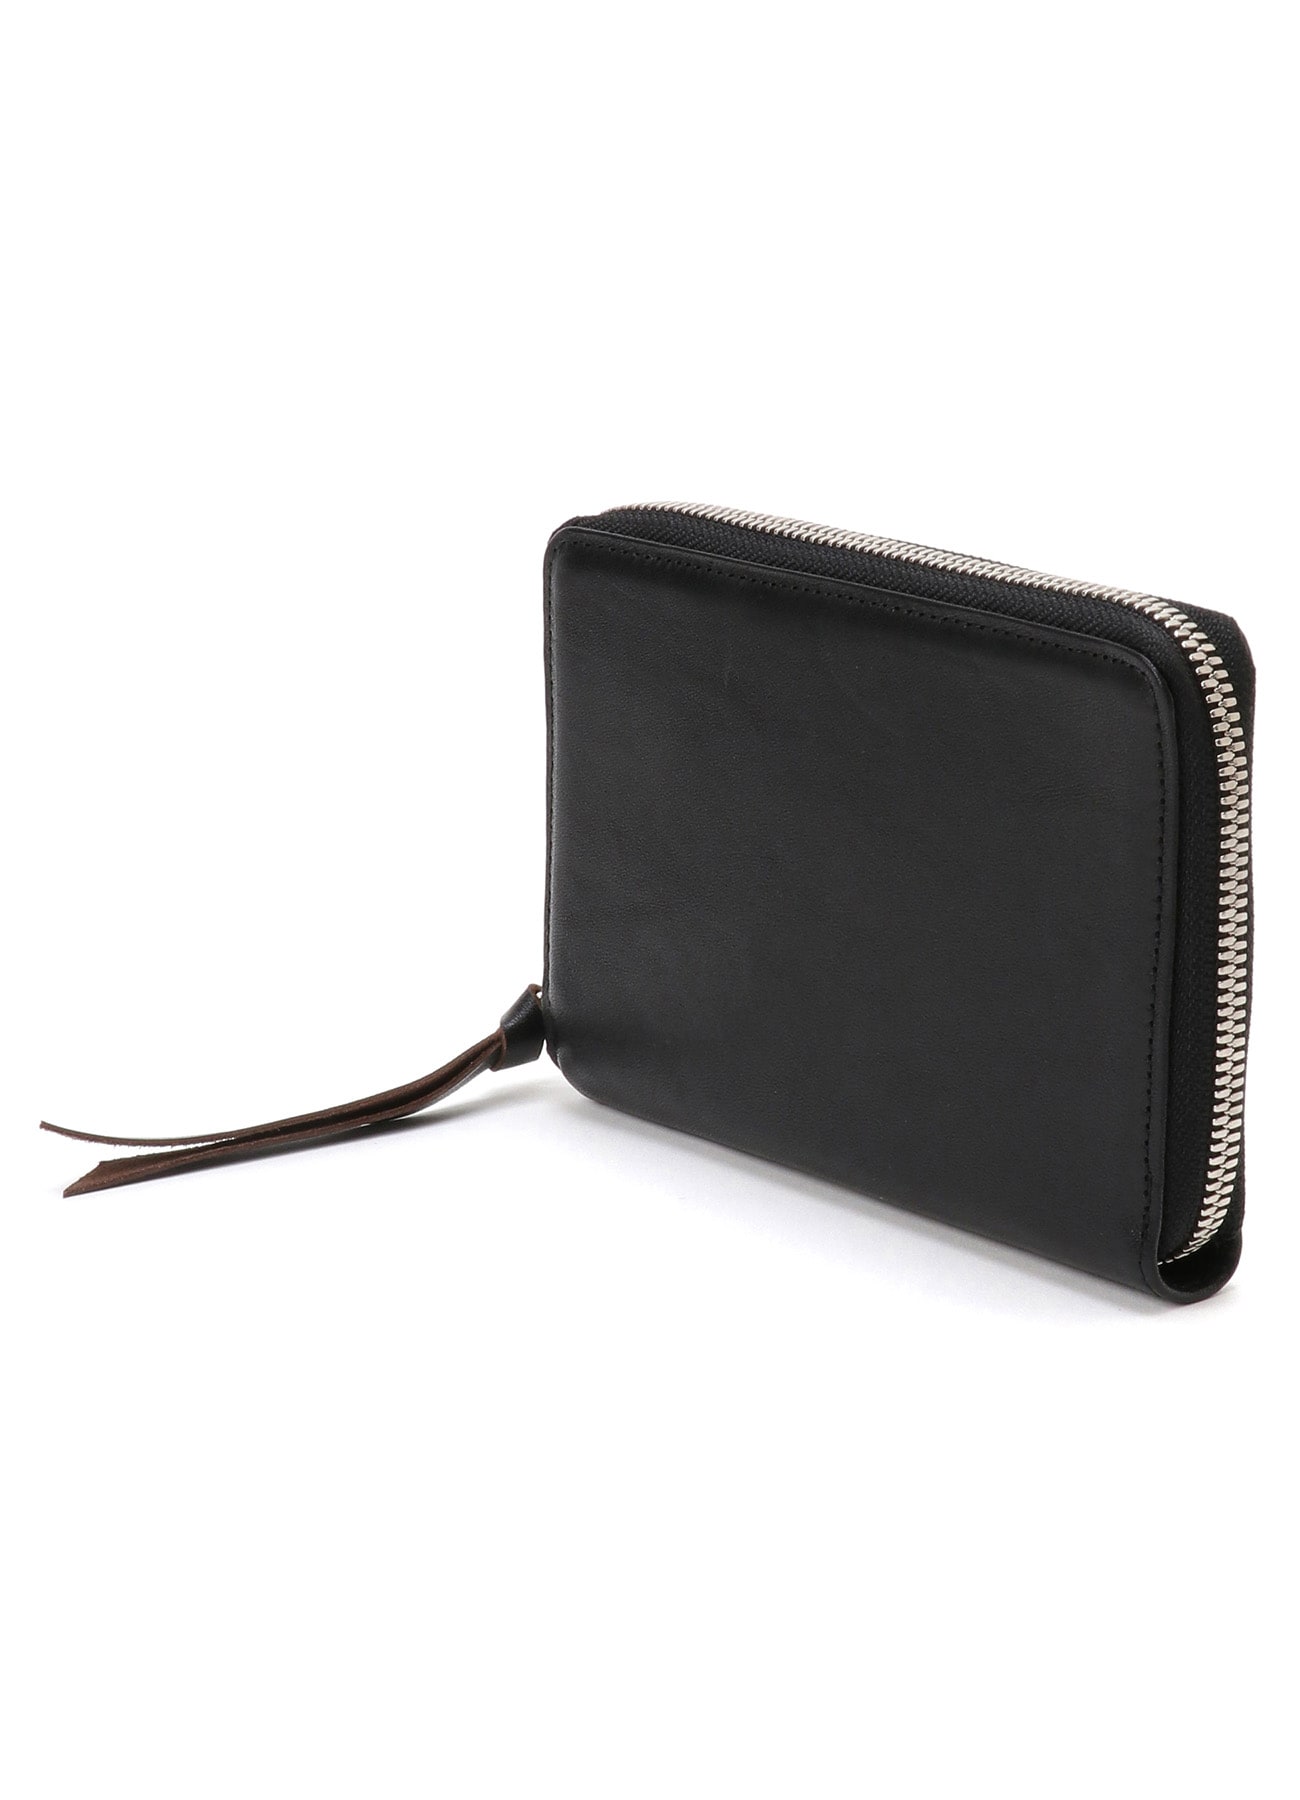 HORSE LEATHER THREE SIDE OPEN WALLET